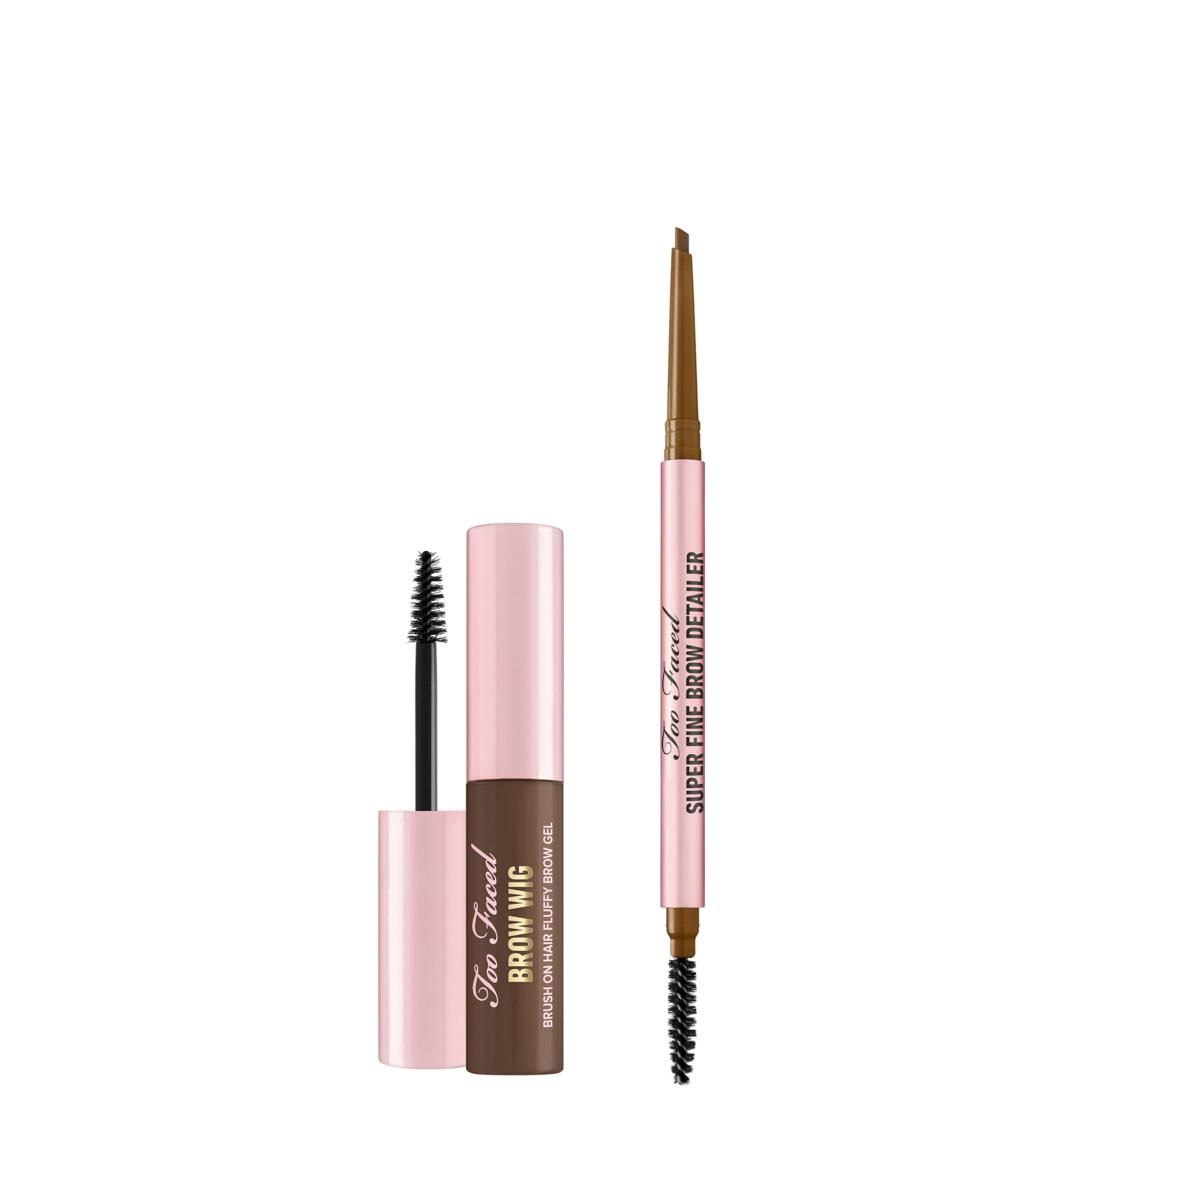 Too Faced Superfine Brow Detailer and Brow Wig 2-Piece Set - 20160956 | HSN | HSN